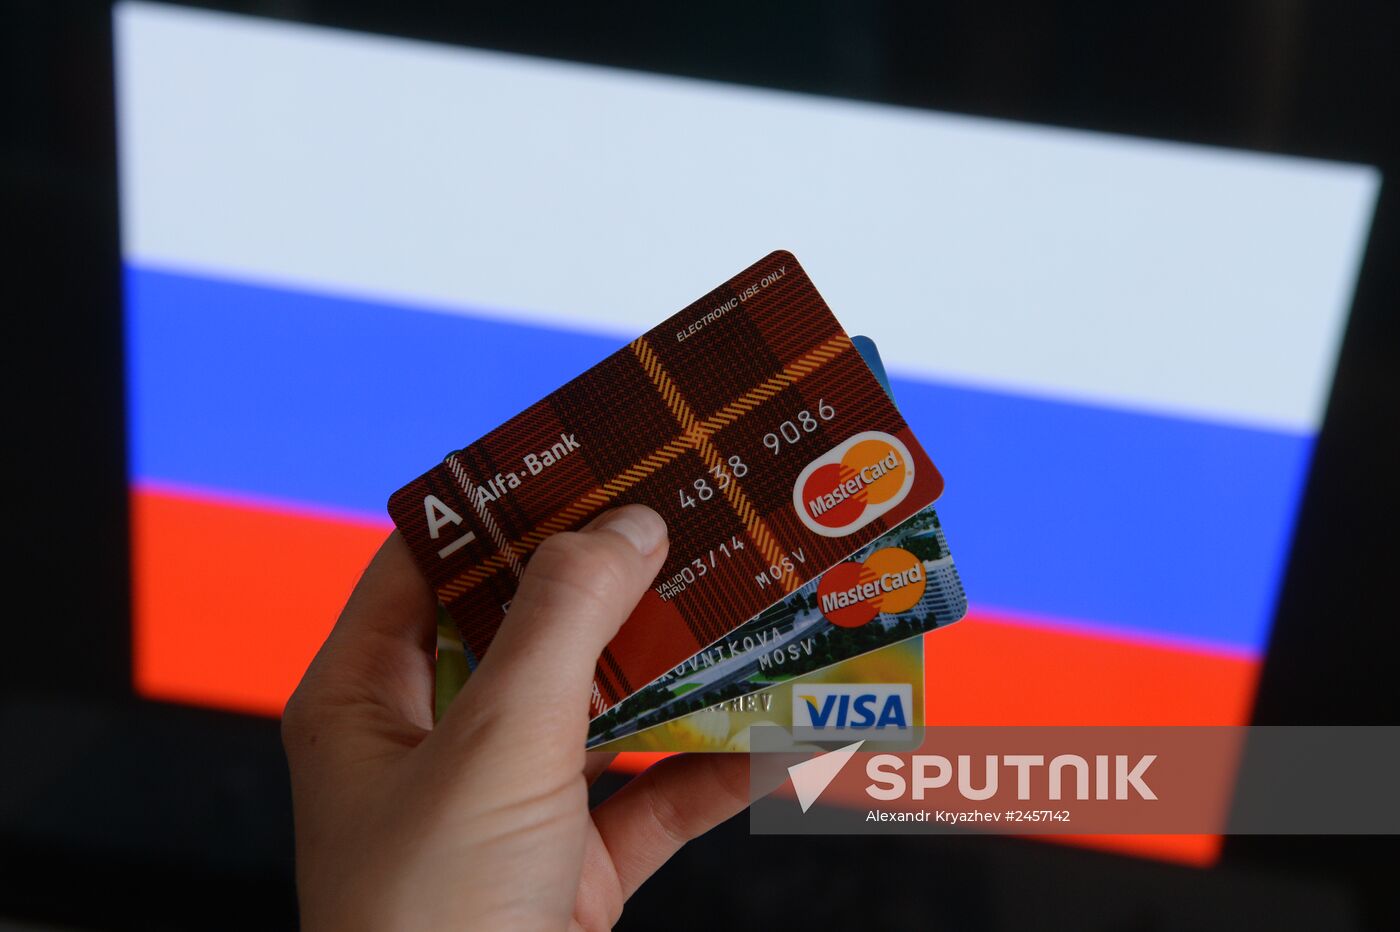 Bank cards of Visa and MasterCard international payment systems